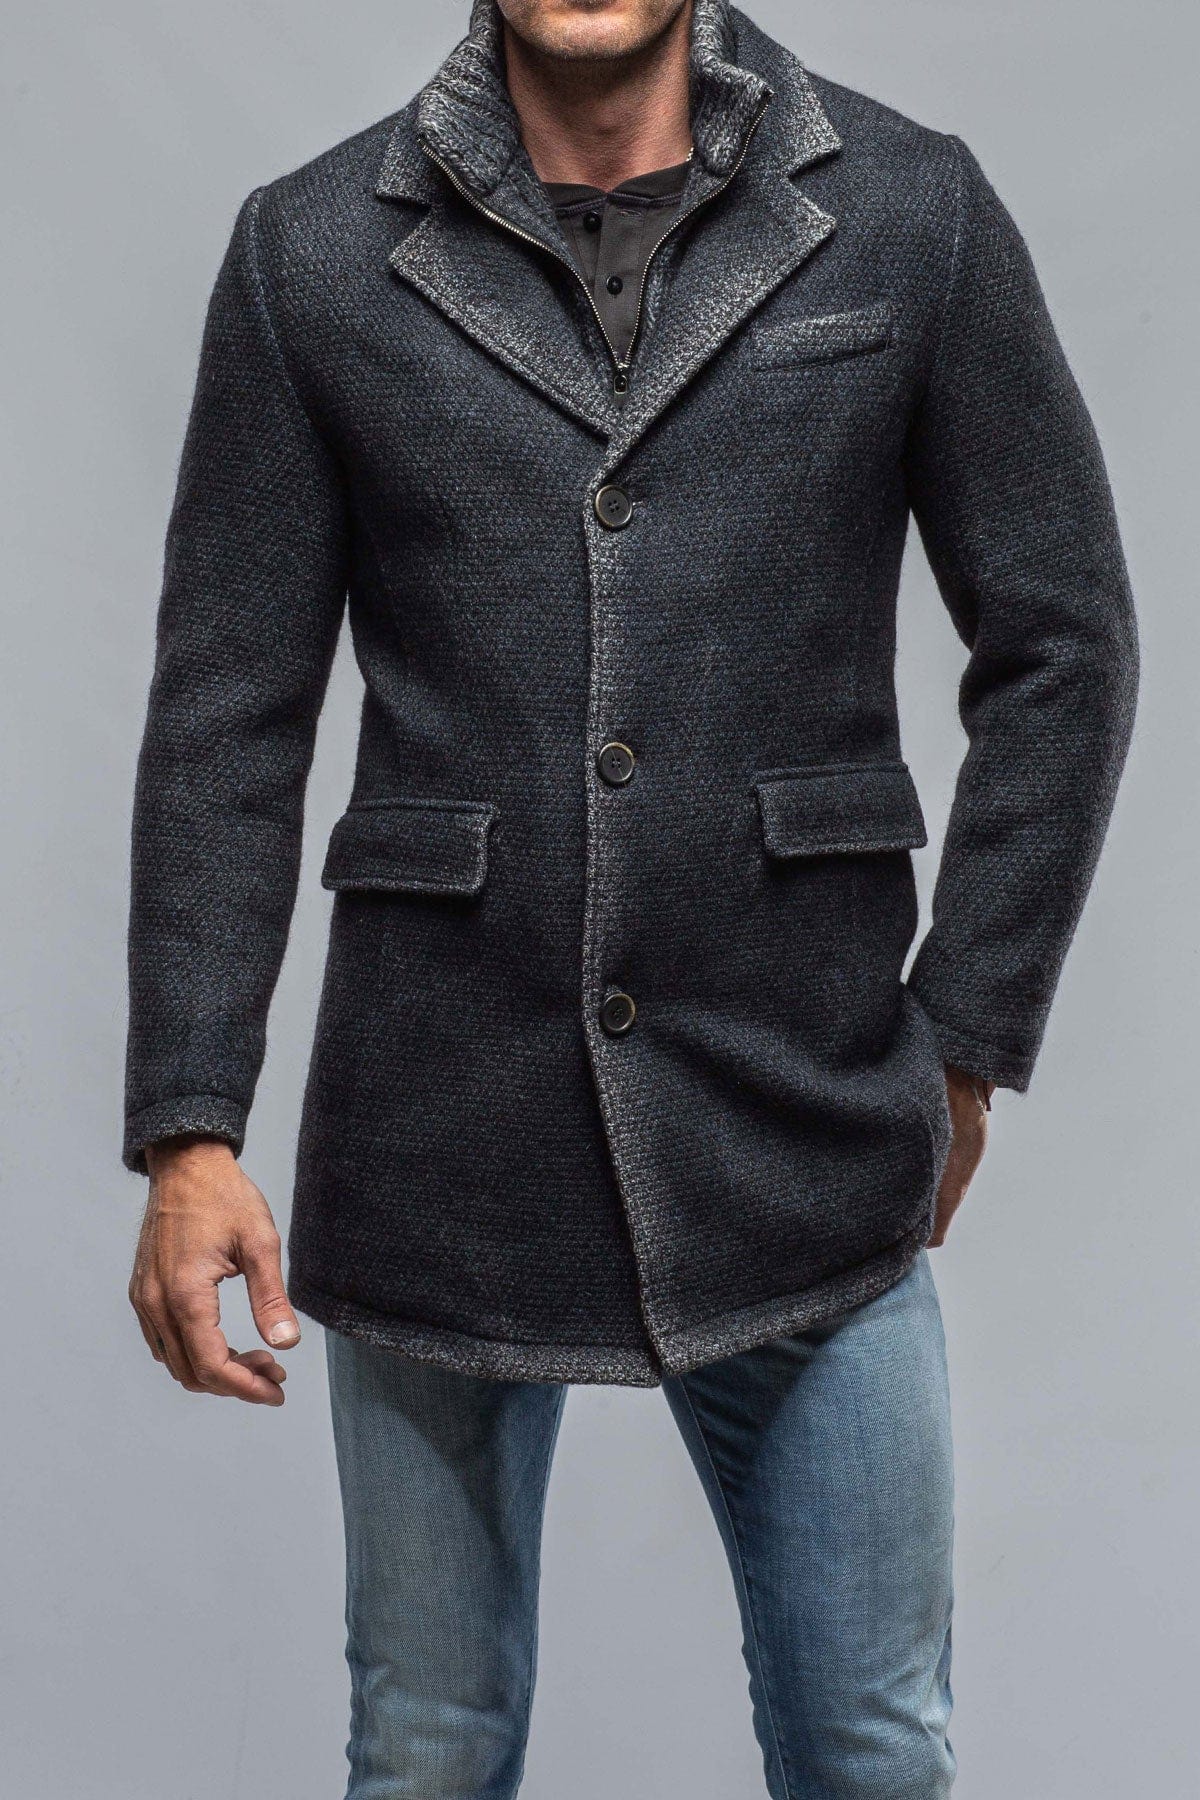 Leon Knitted Jacket in Navy - AXEL'S